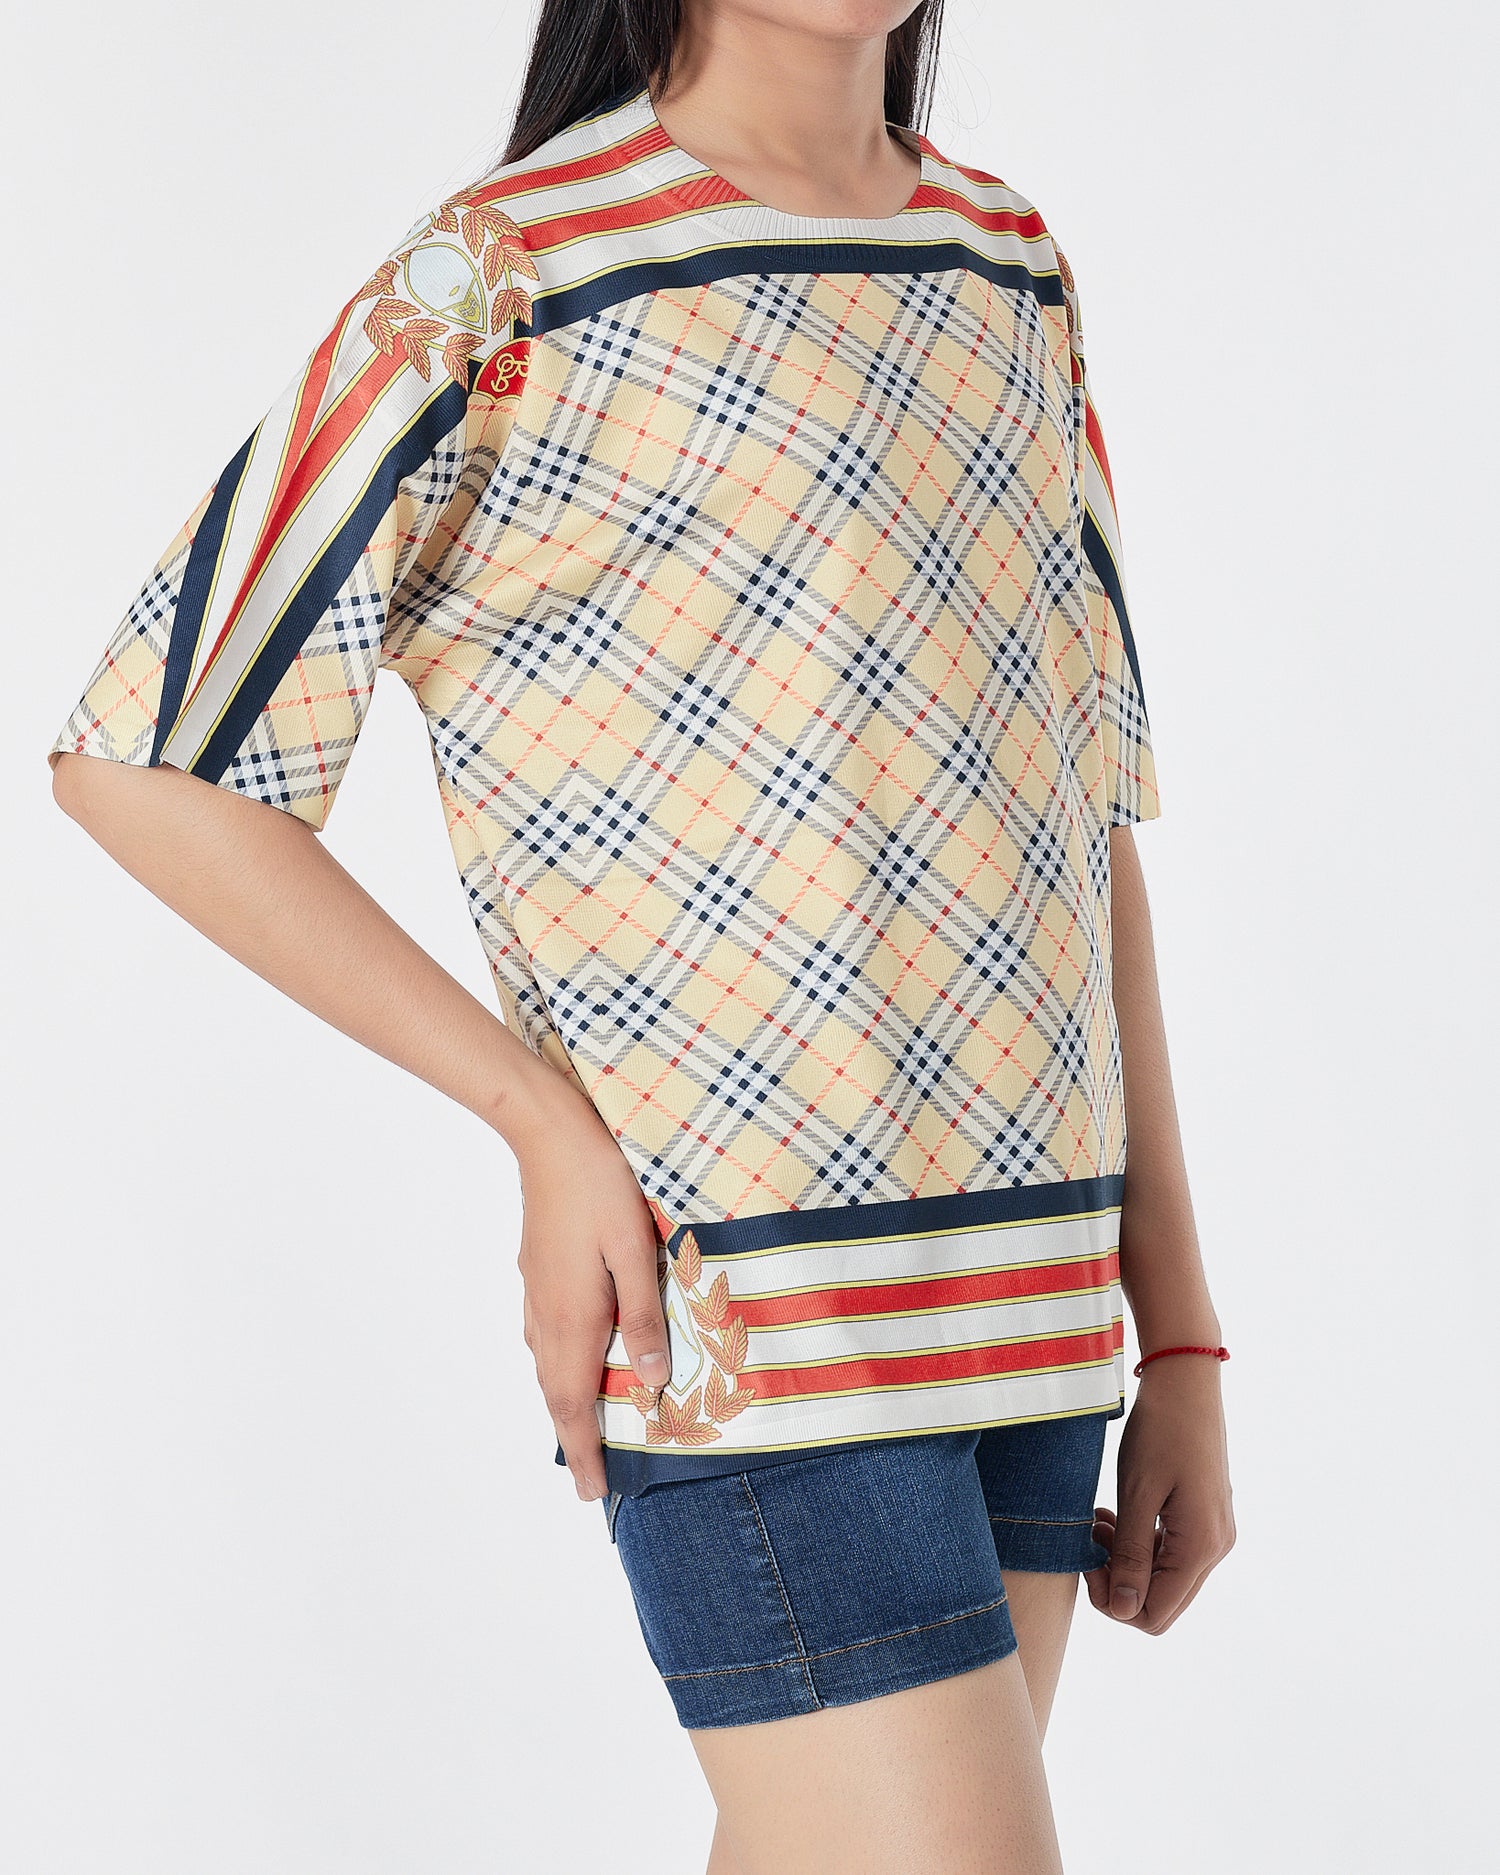 Checked Over Printed Lady T-Shirt 15.90